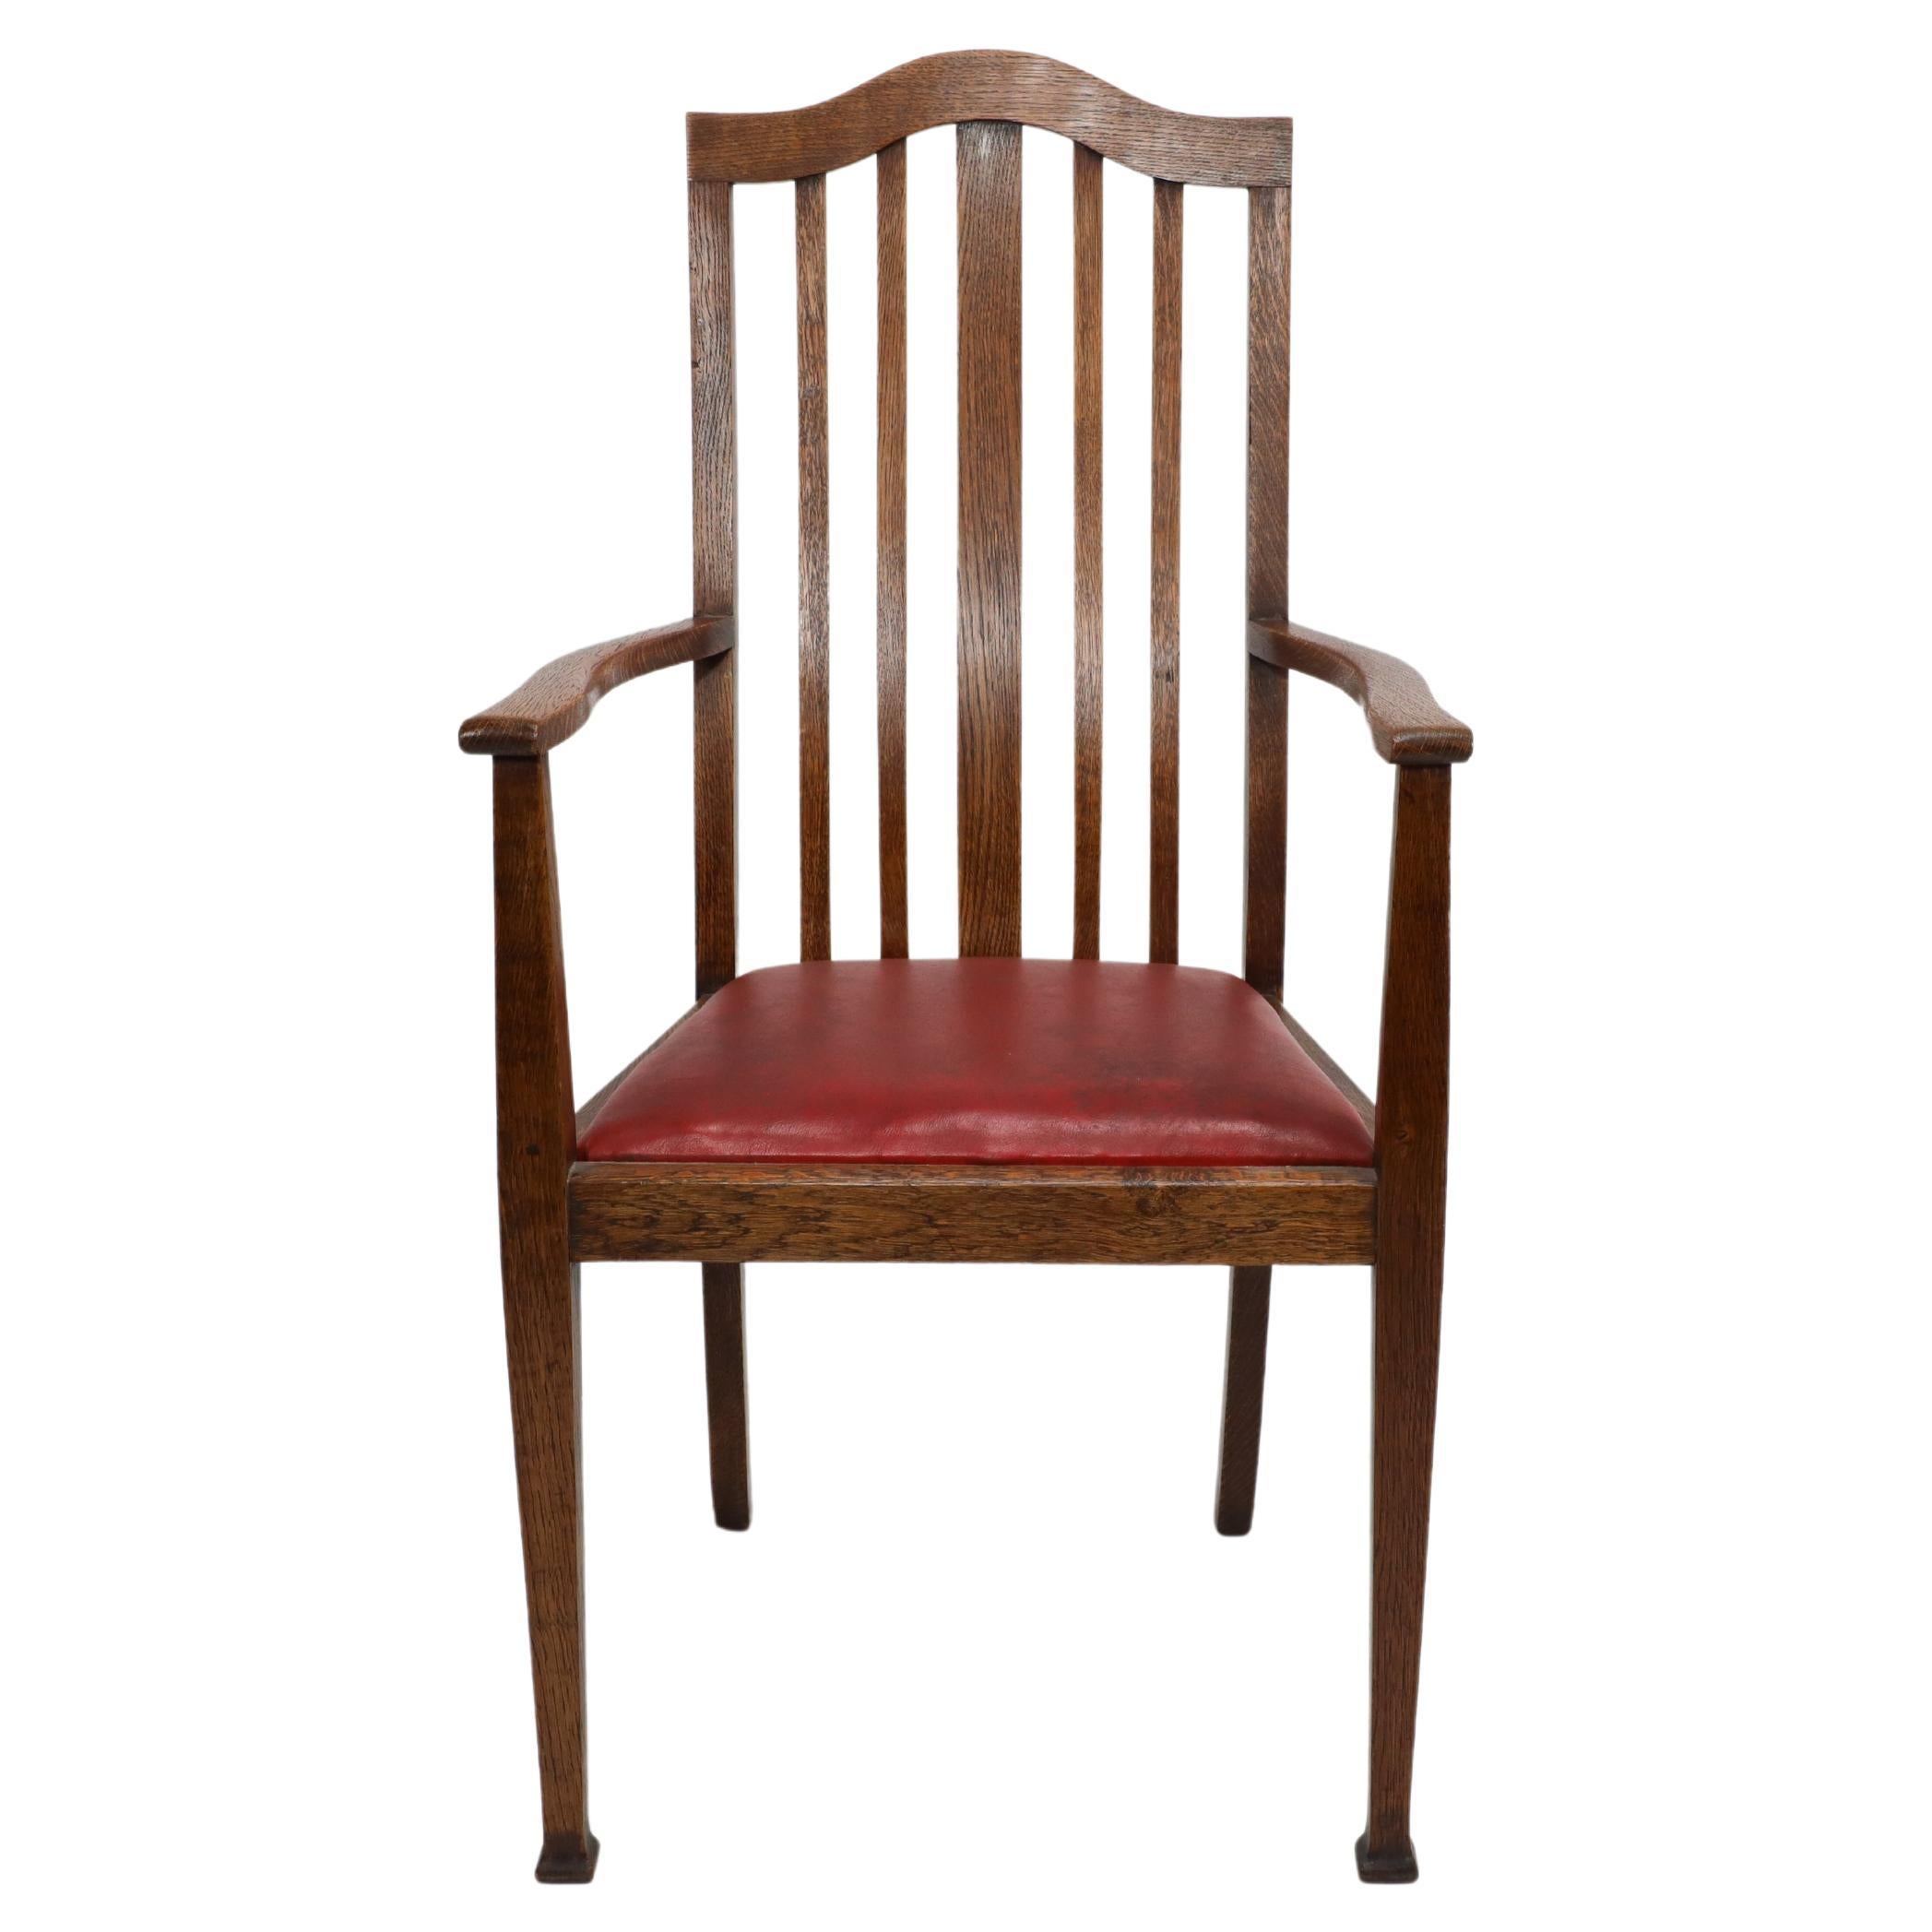 Three Arts and Crafts oak dining armchairs with arched tops and shaped slats to the back making them very comfy armchairs. Professionally recovered in a quality wine coloured leather.